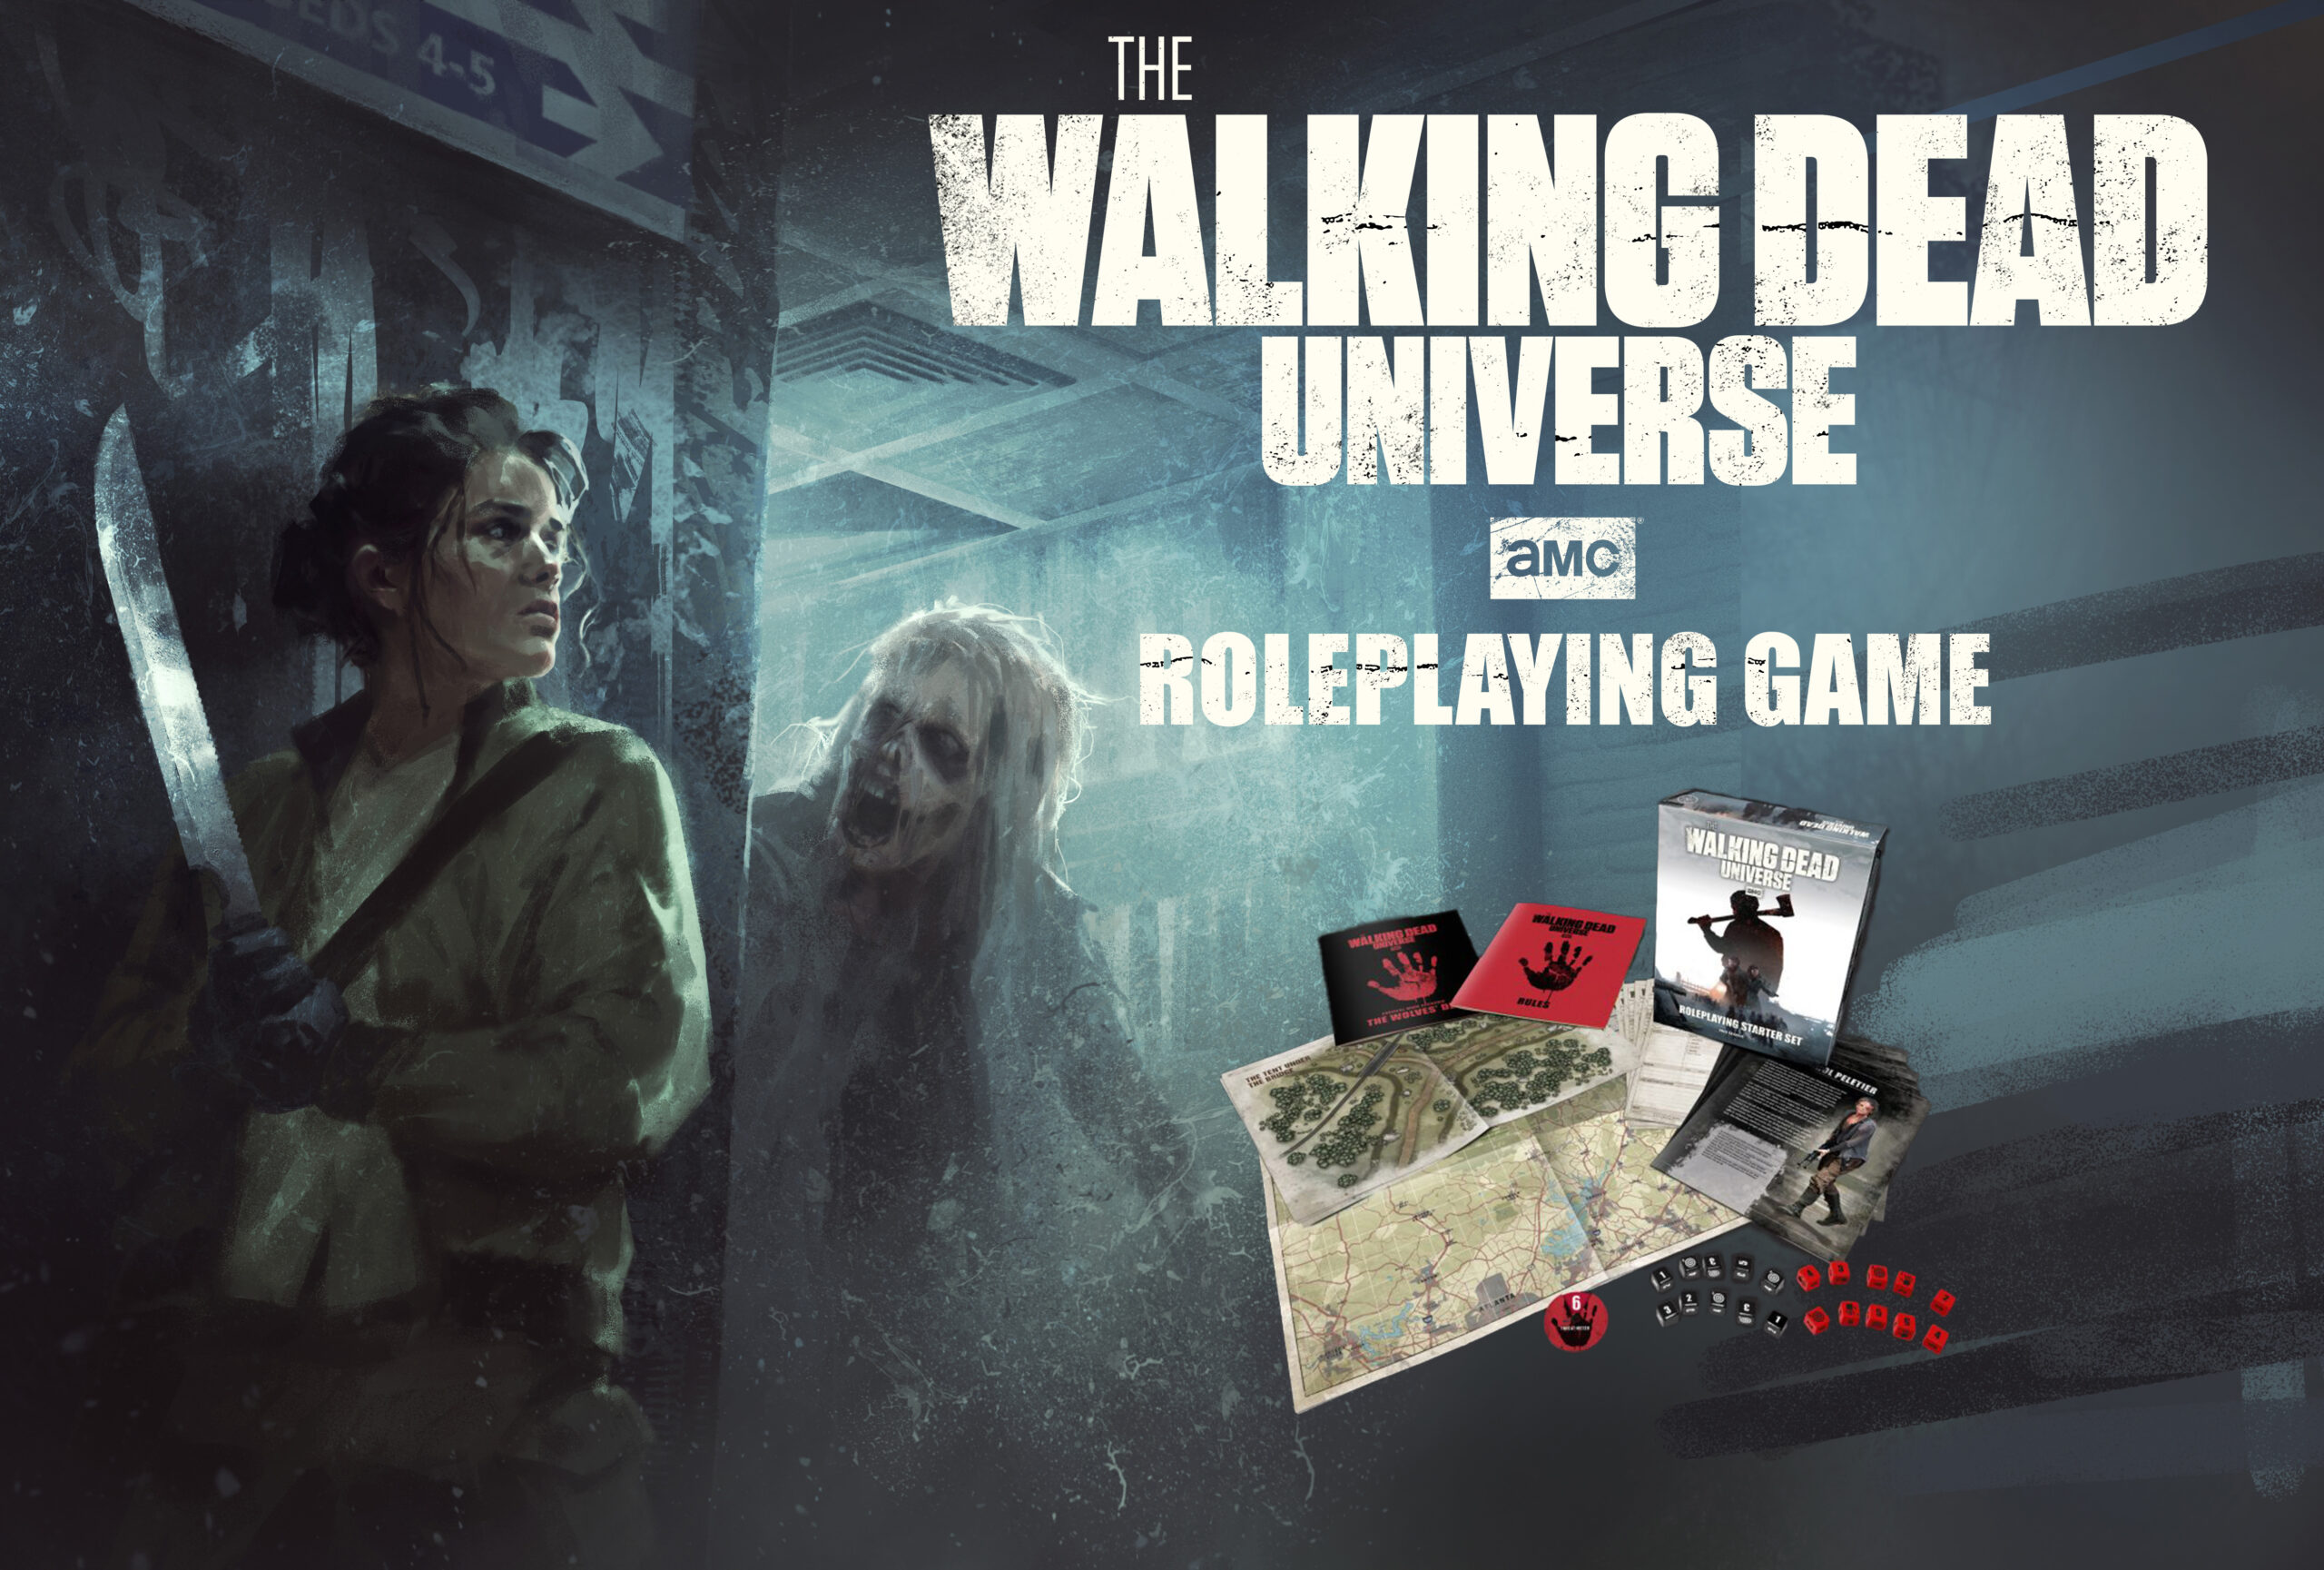 Walking Dead Universe Role Playing Game by Free League Publishing